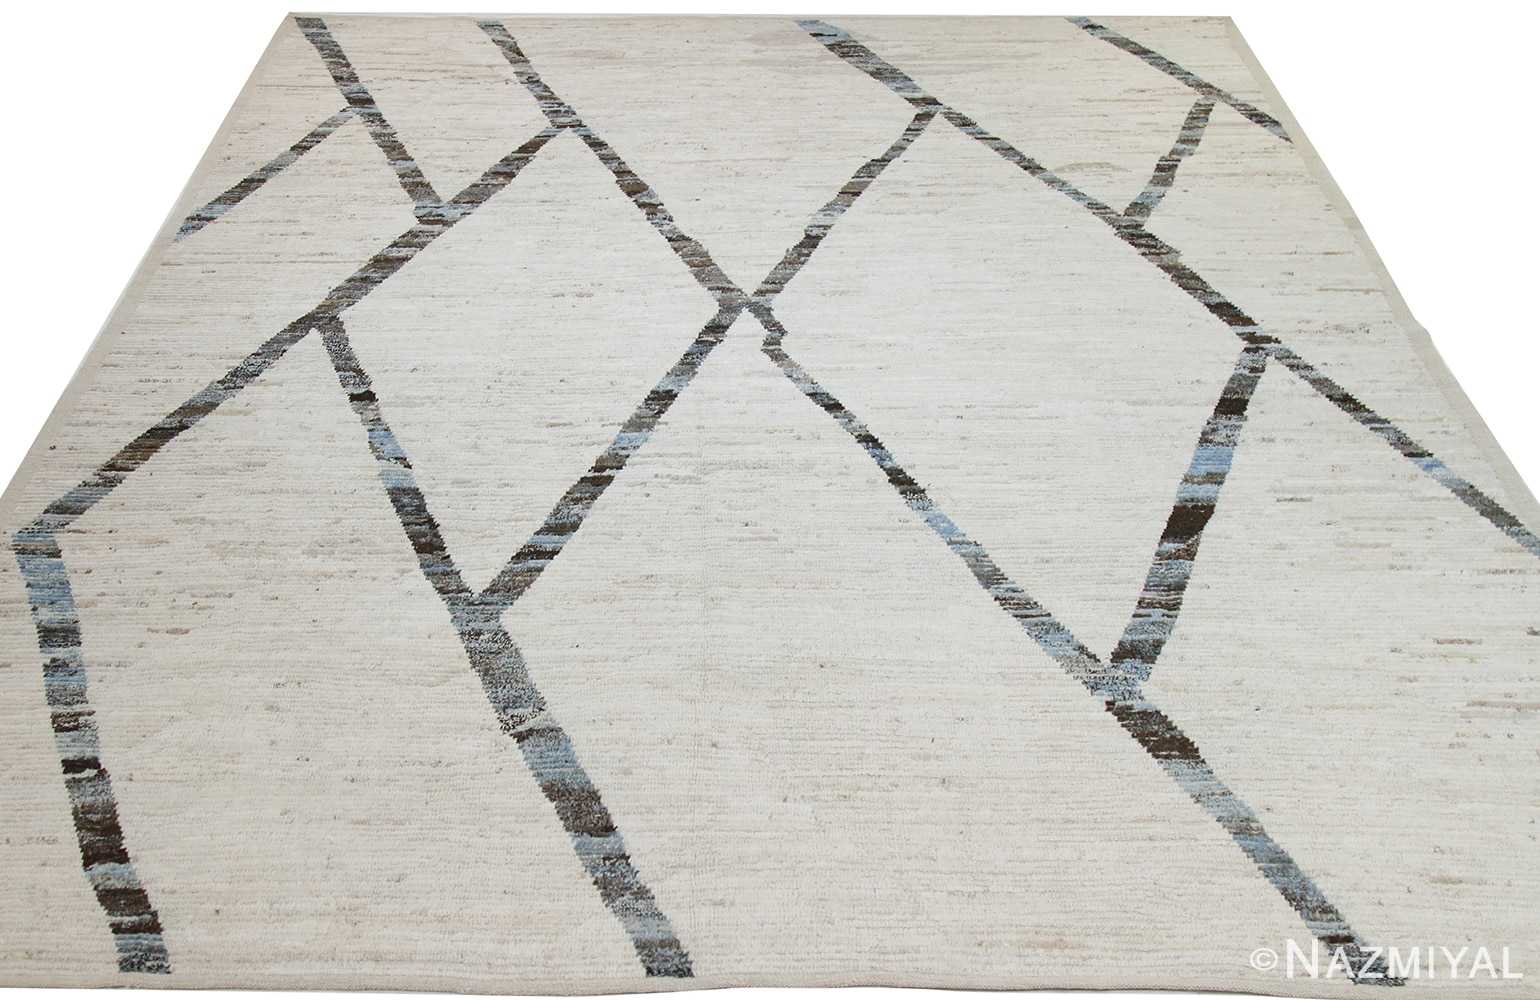 Whole View Of Geometric Ivory Modern Moroccan Style Afghan Rug 60115 by Nazmiyal NYC